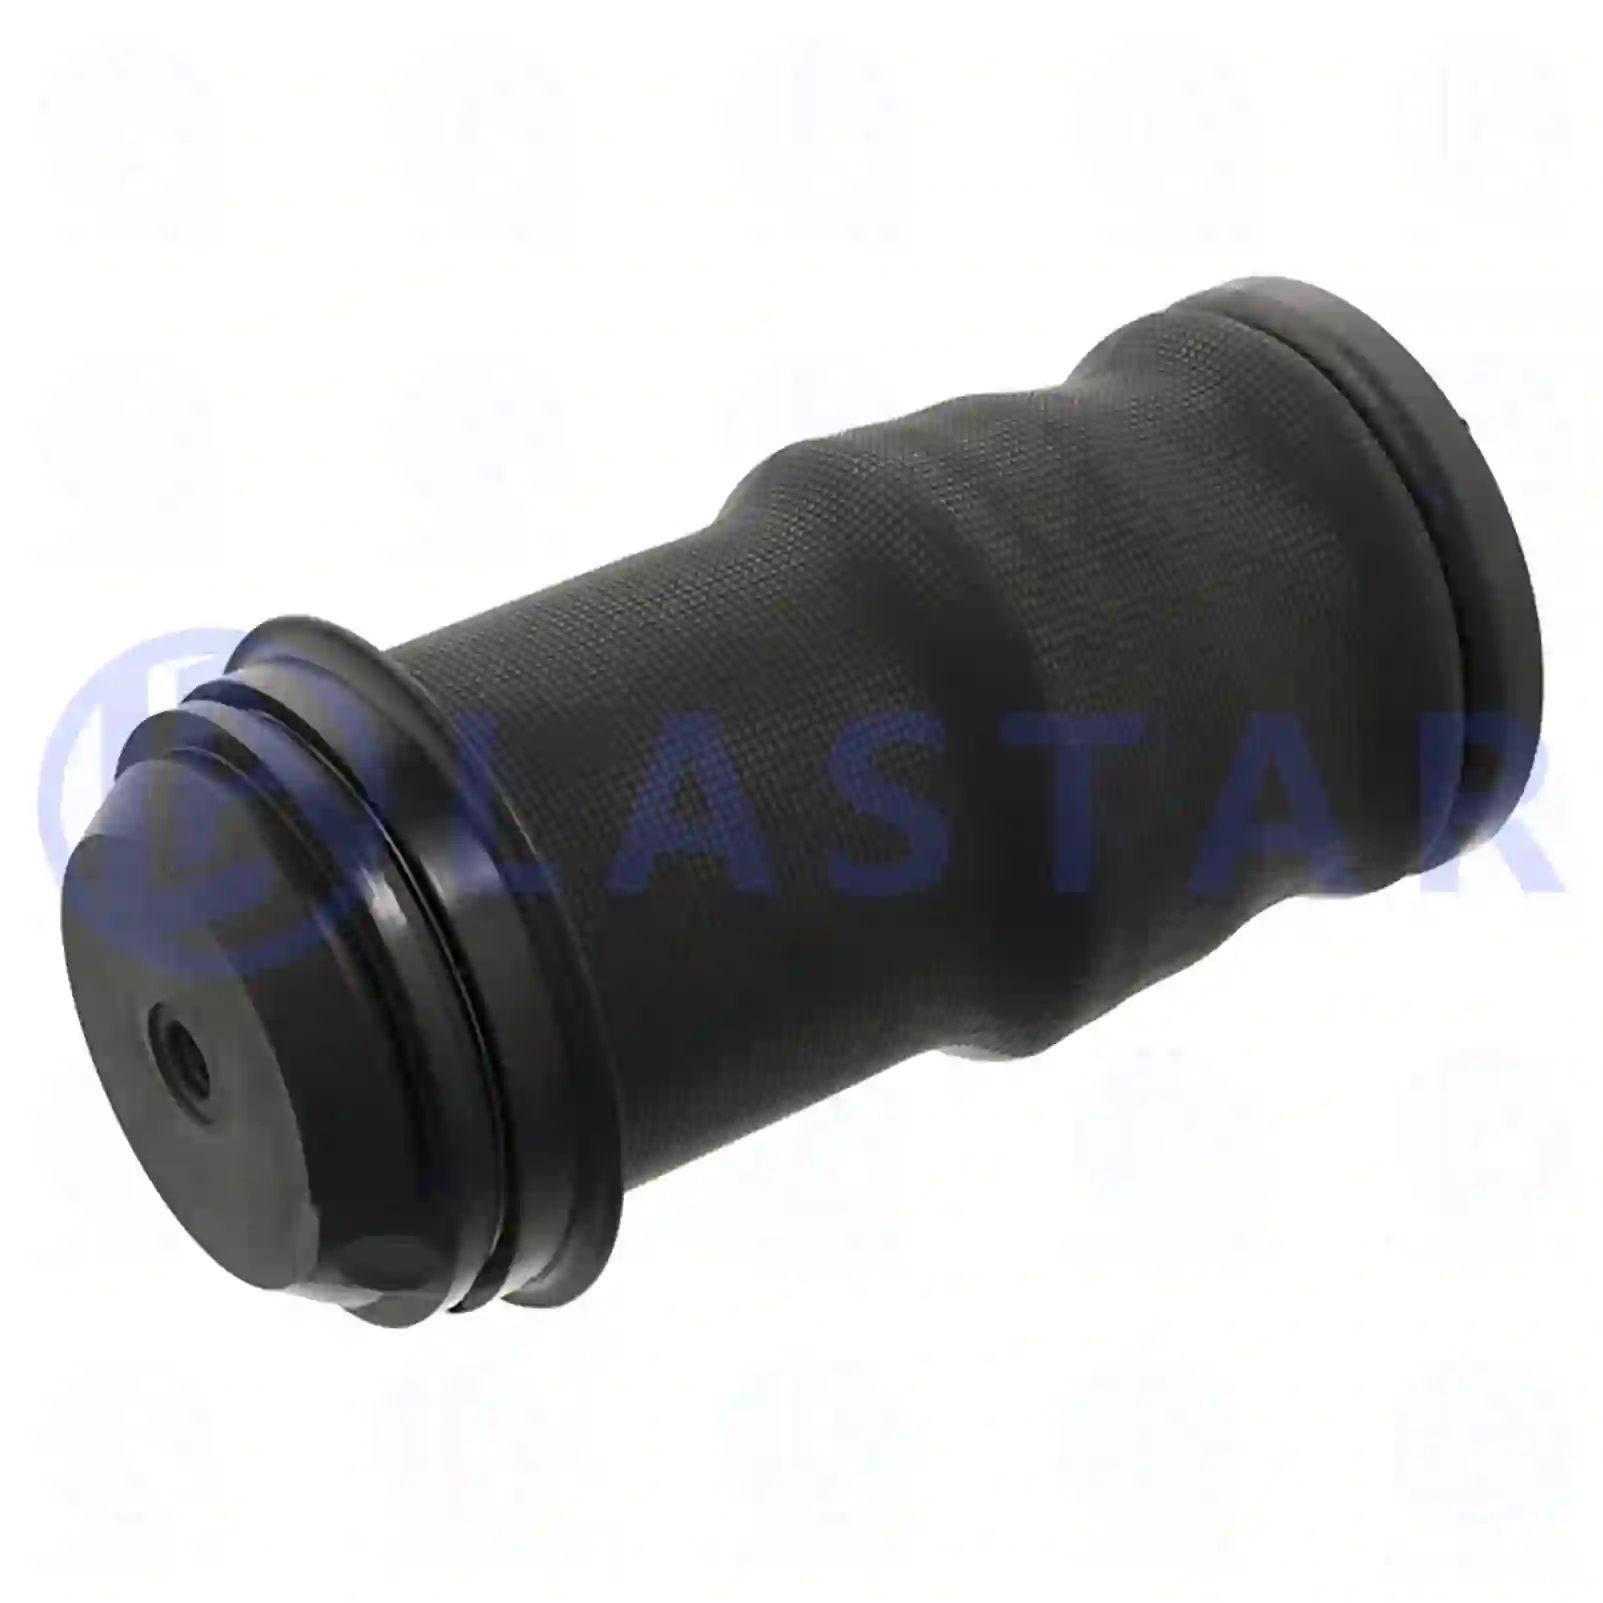 Air bellow, cabin shock absorber, 77735816, 1907301 ||  77735816 Lastar Spare Part | Truck Spare Parts, Auotomotive Spare Parts Air bellow, cabin shock absorber, 77735816, 1907301 ||  77735816 Lastar Spare Part | Truck Spare Parts, Auotomotive Spare Parts